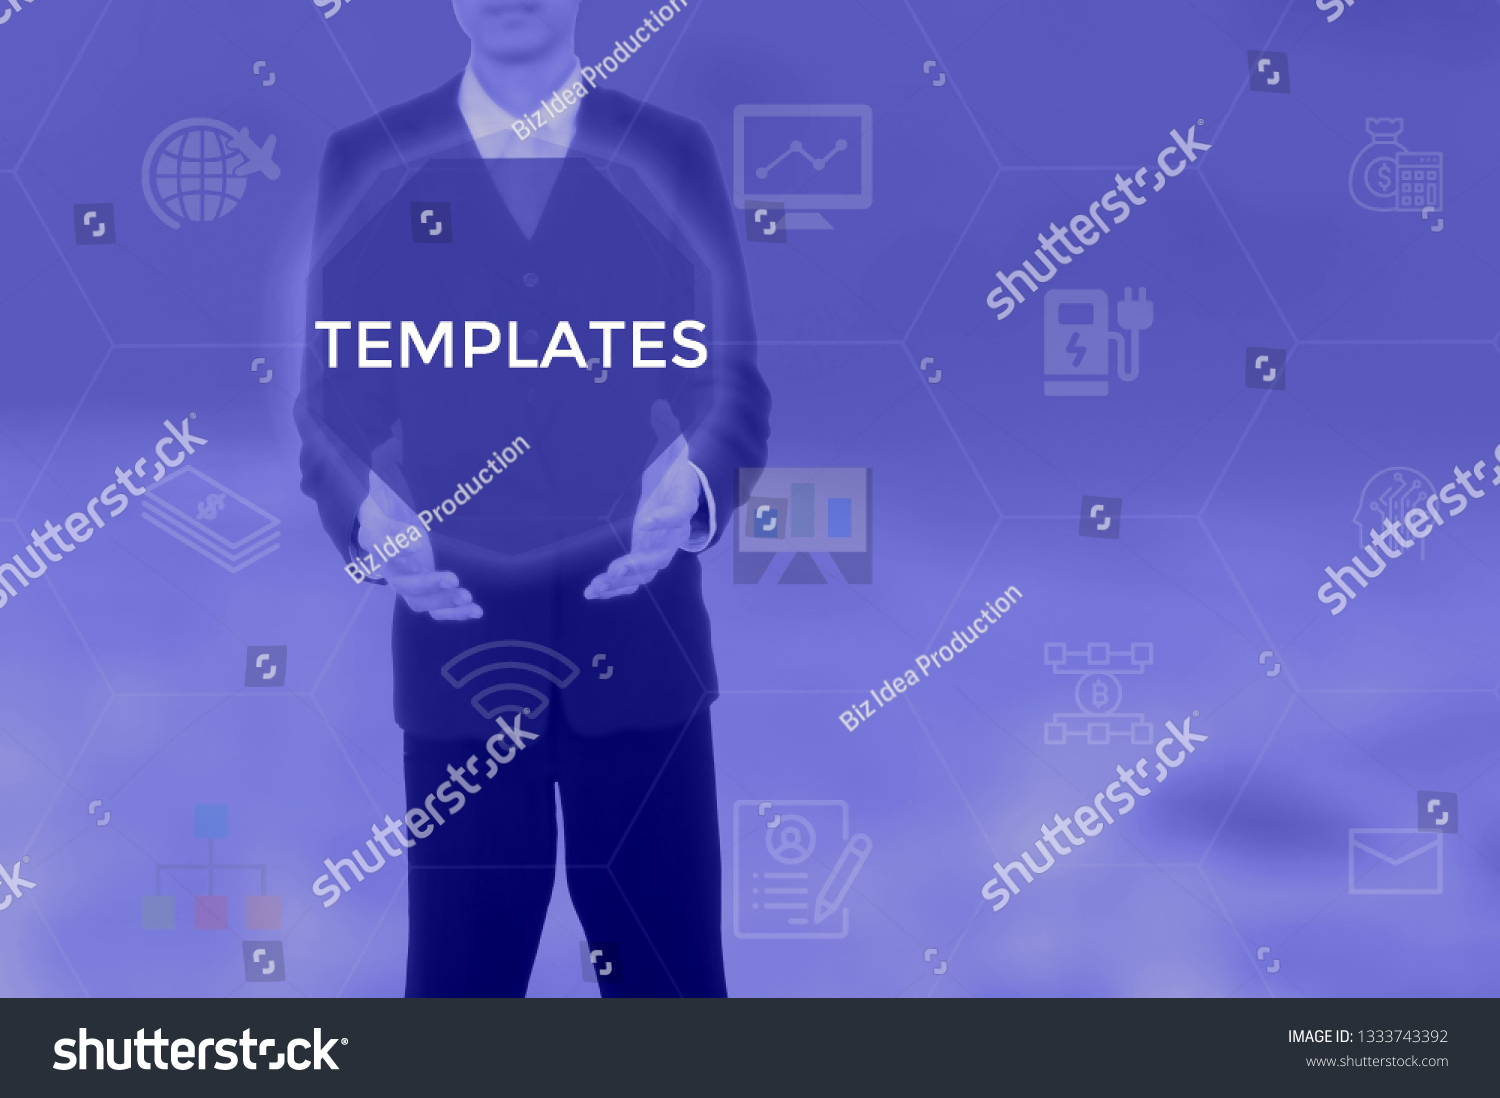 TEMPLATES - technology and business concept #1333743392